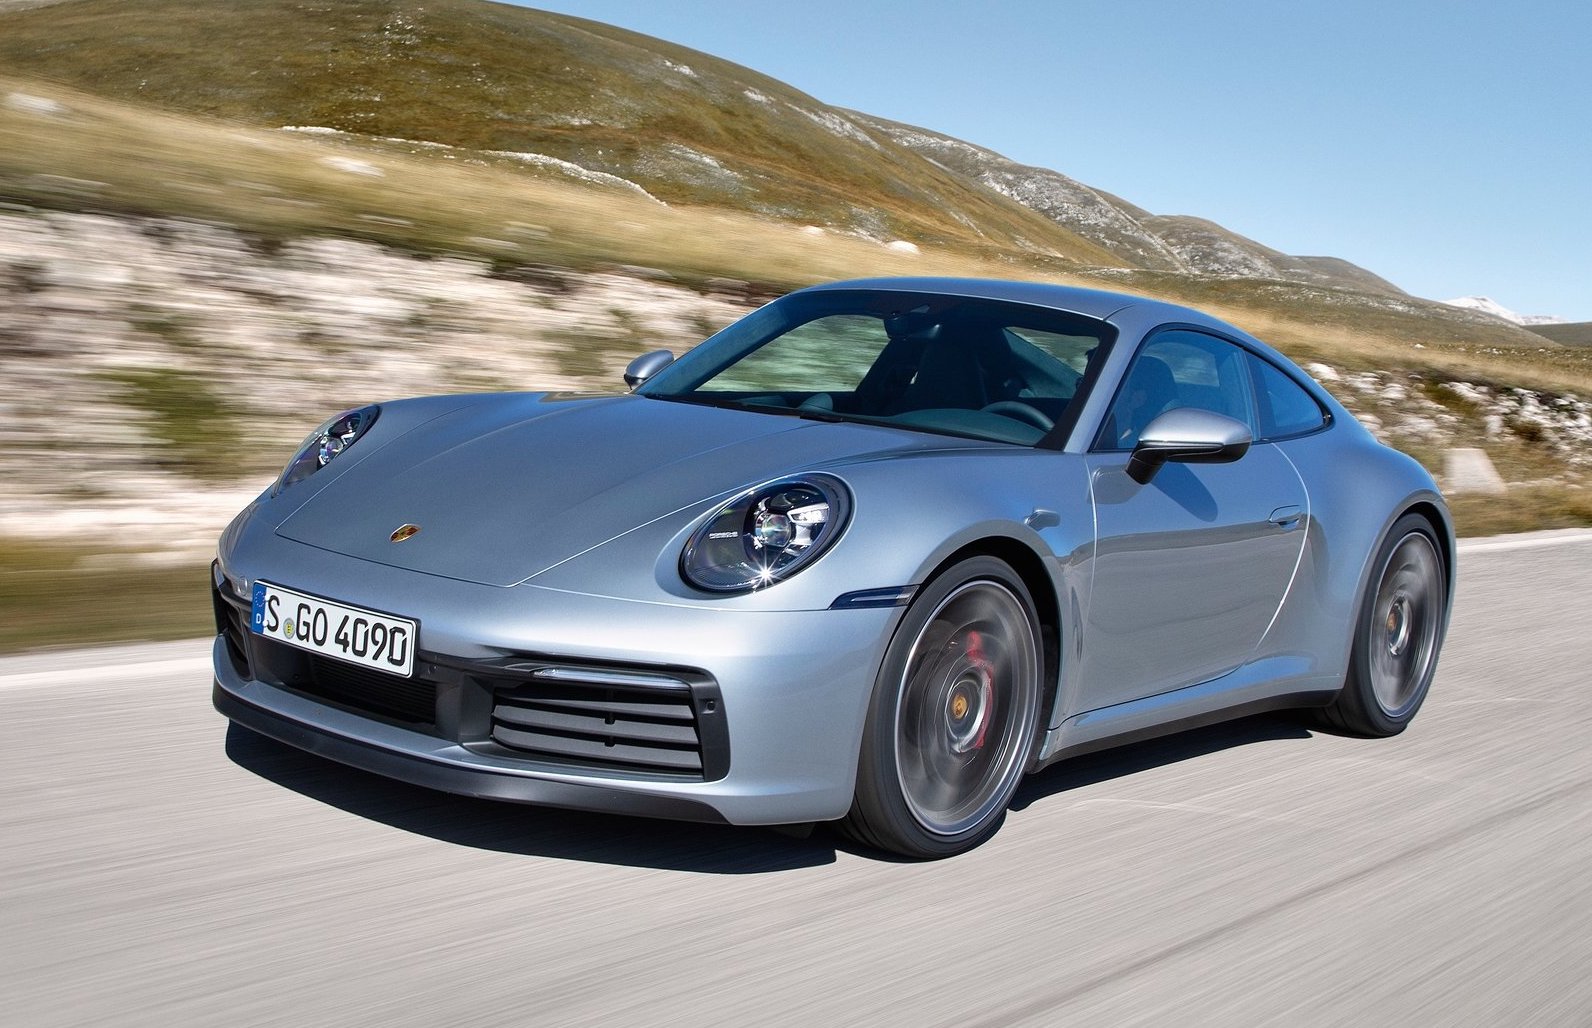 Porsche 911 hybrid could do 0-100 in 3.4 seconds – report